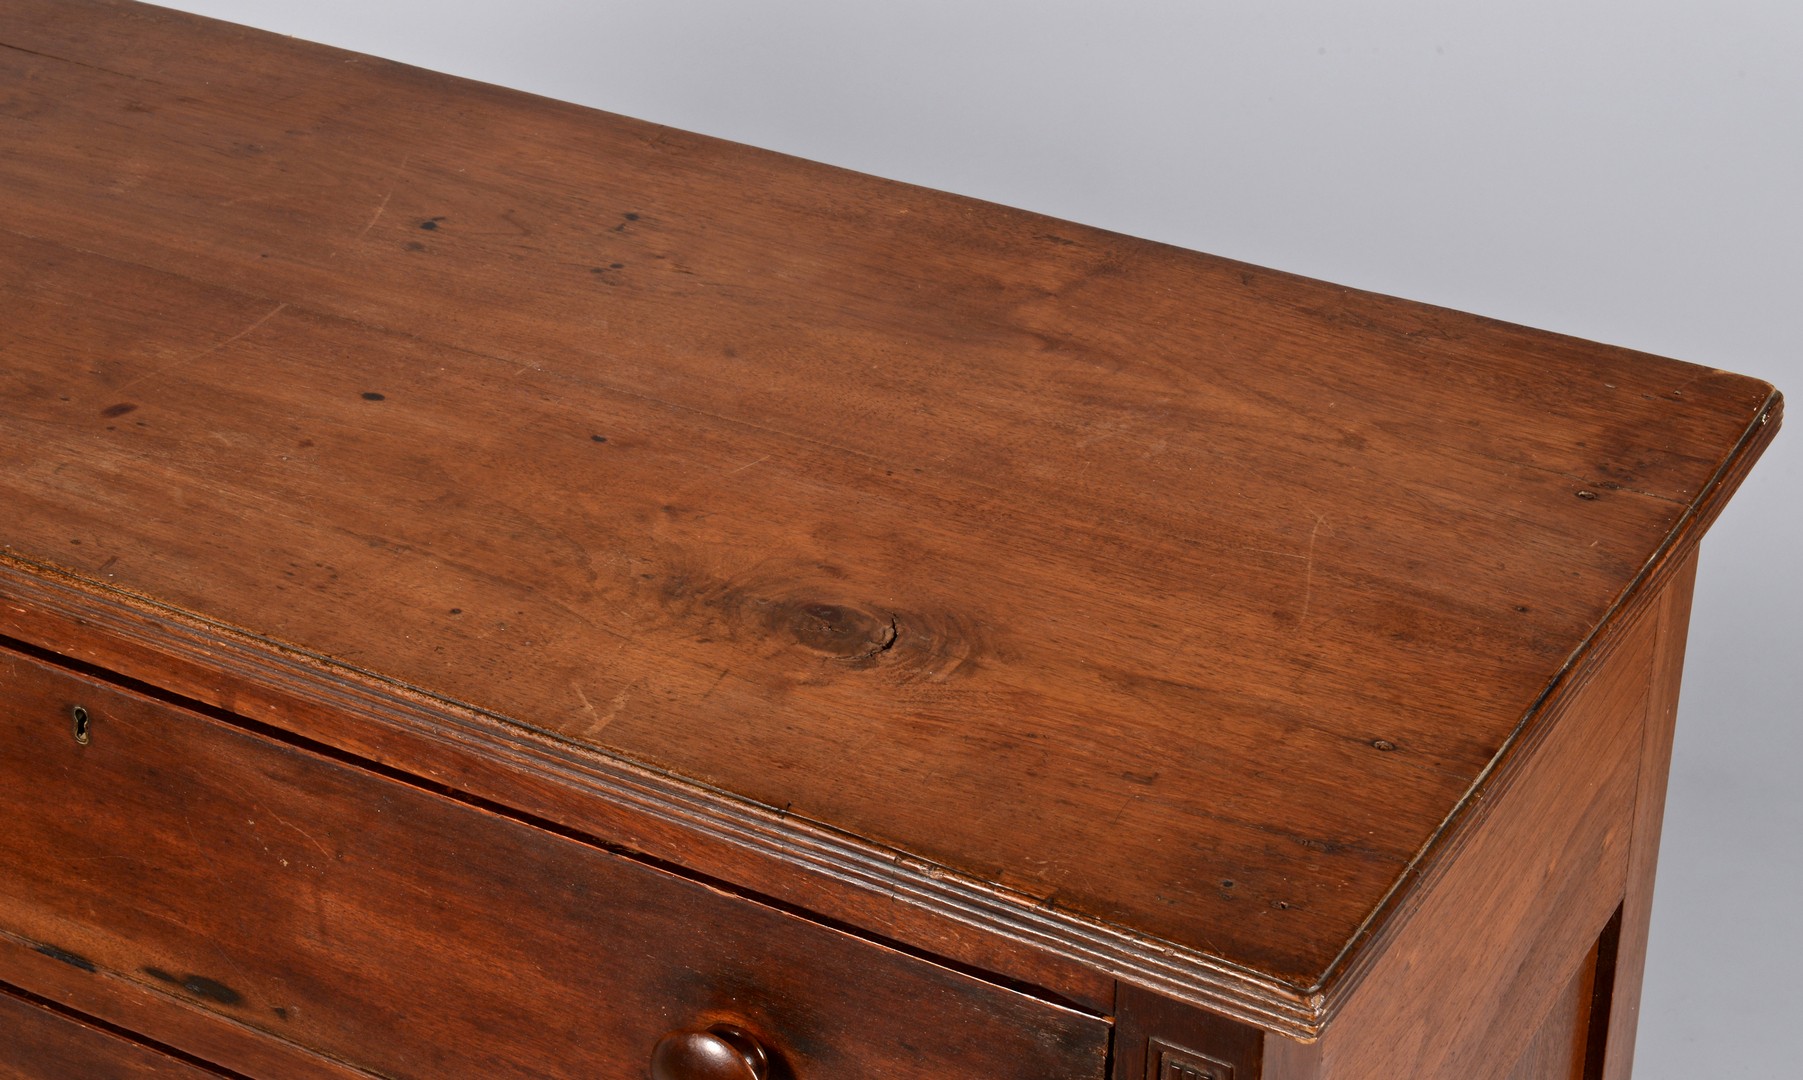 Lot 106: Kentucky walnut chest of drawers, reeded stiles